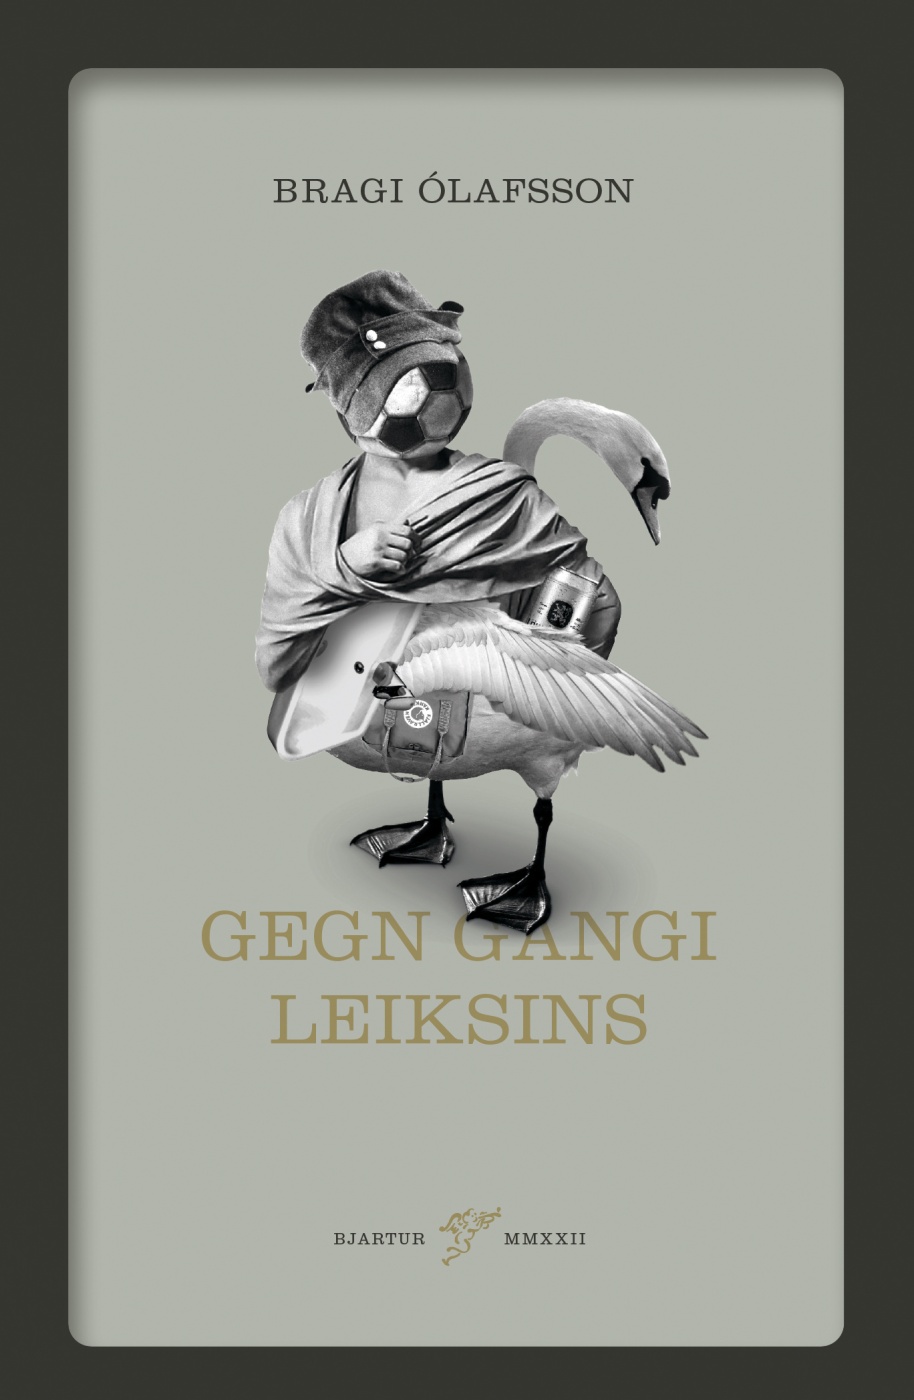 Gegn gangi leiksins (Against the Course of the Game)